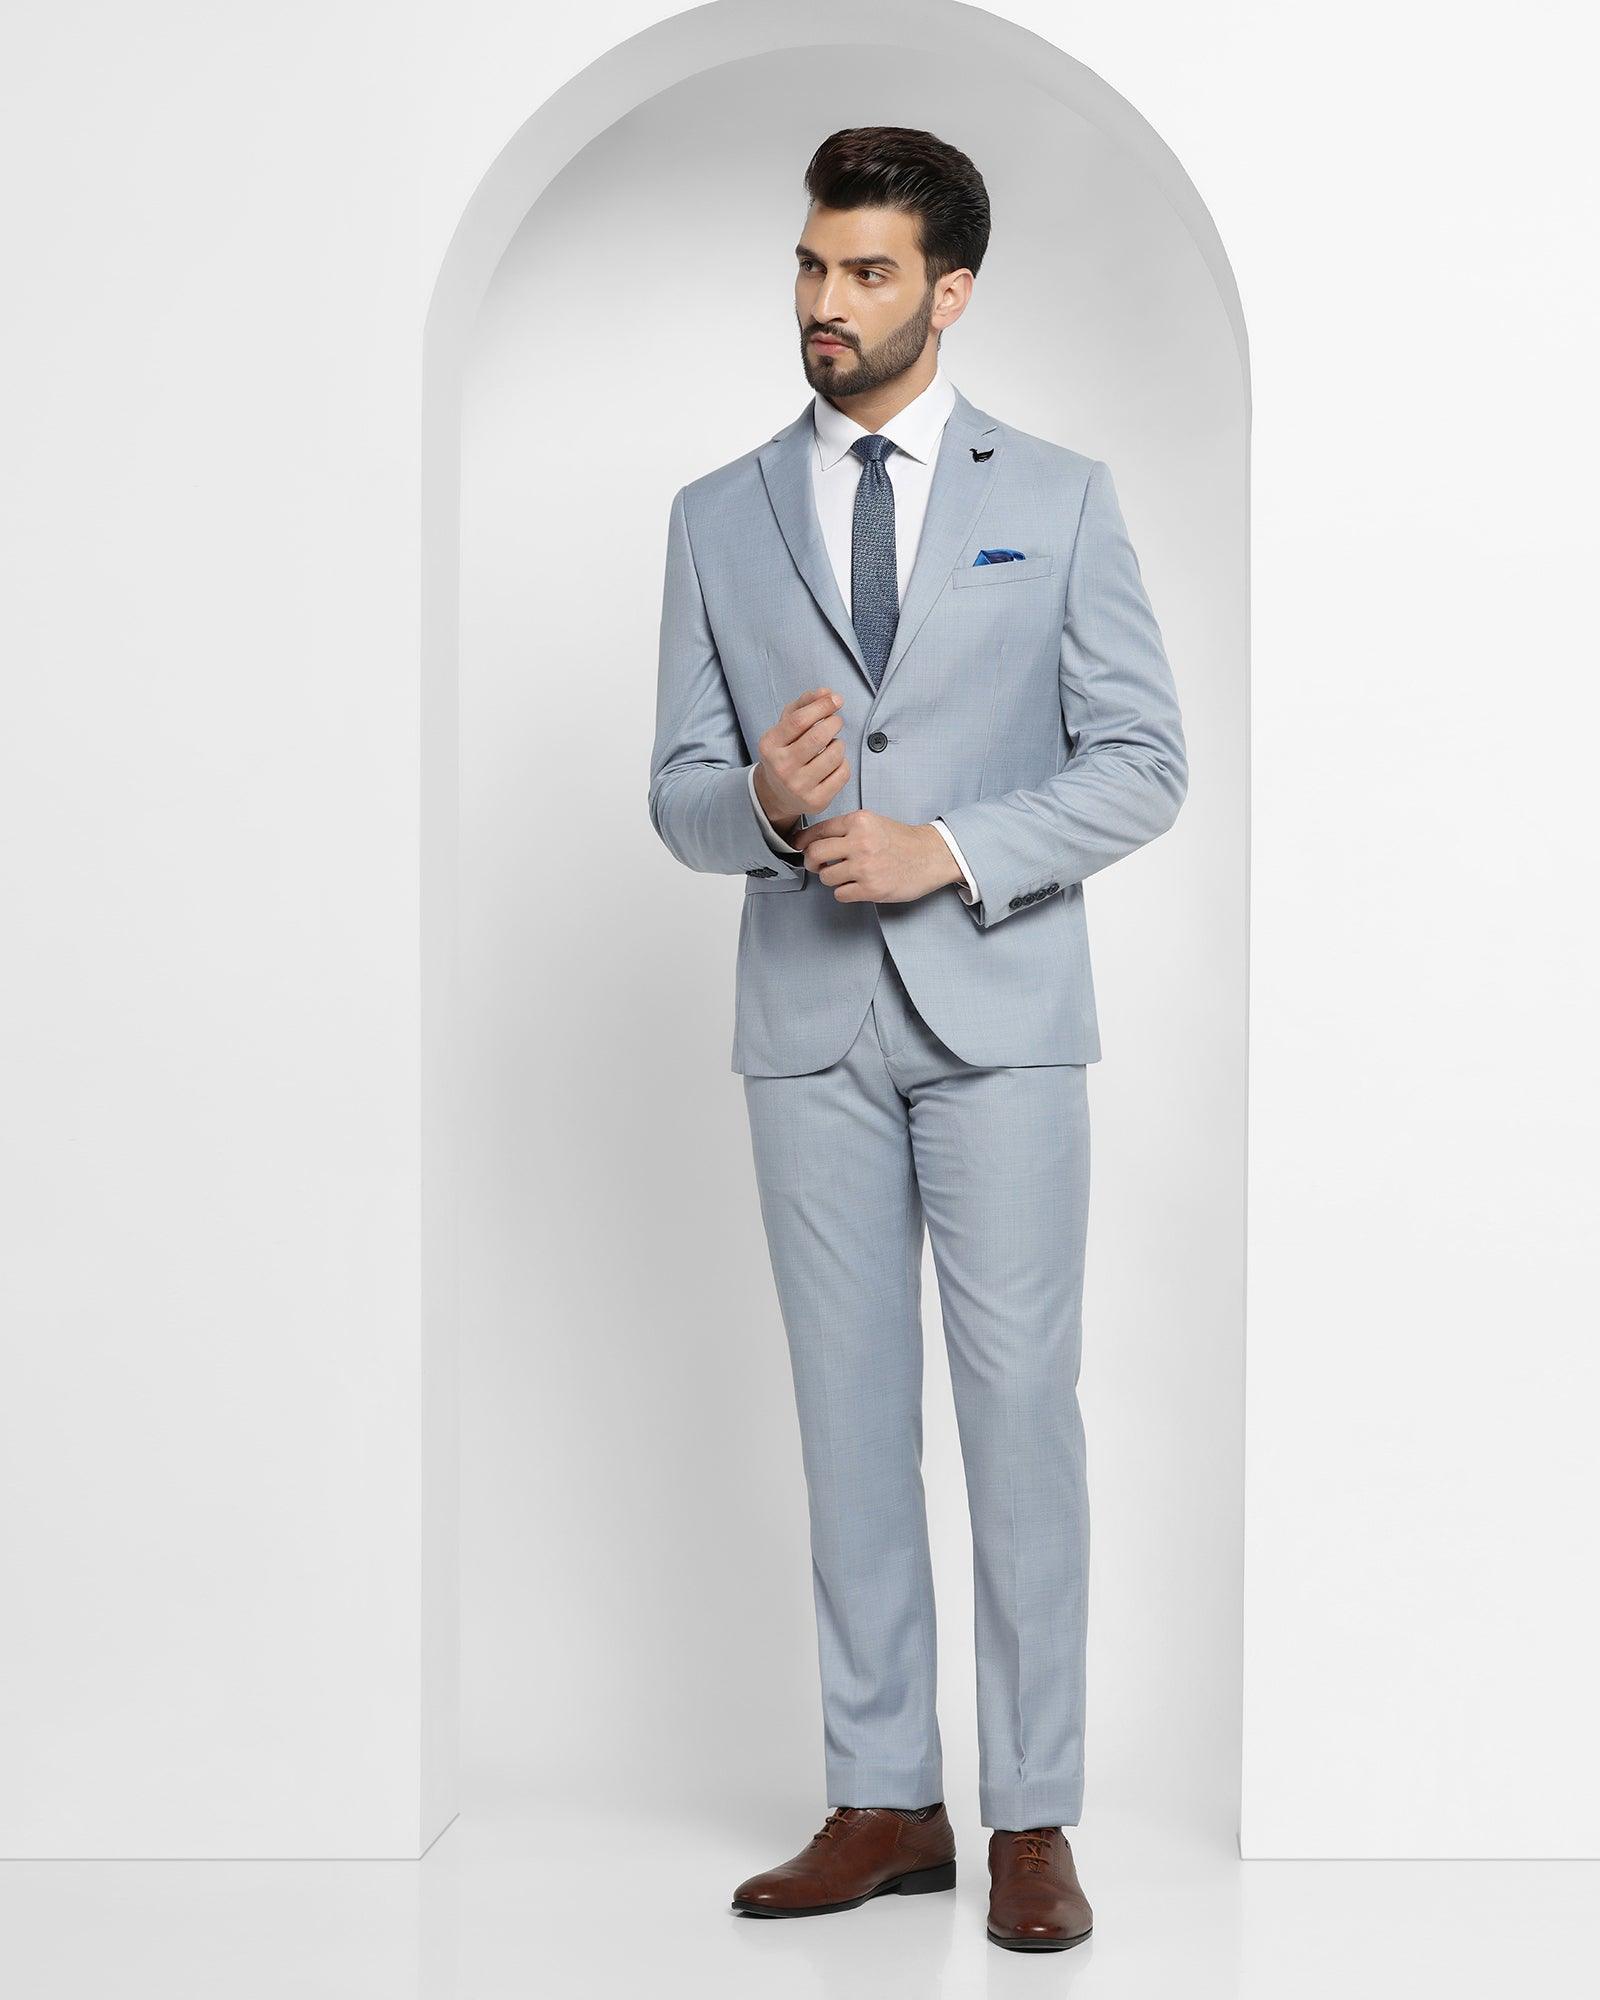 kaushal pahwa on Instagram: “All new 2 piece  colour#peach#2piece#black#shirt#handwork#shades for any querie… | Pink suit  men, Dress suits for men, Wedding suits men